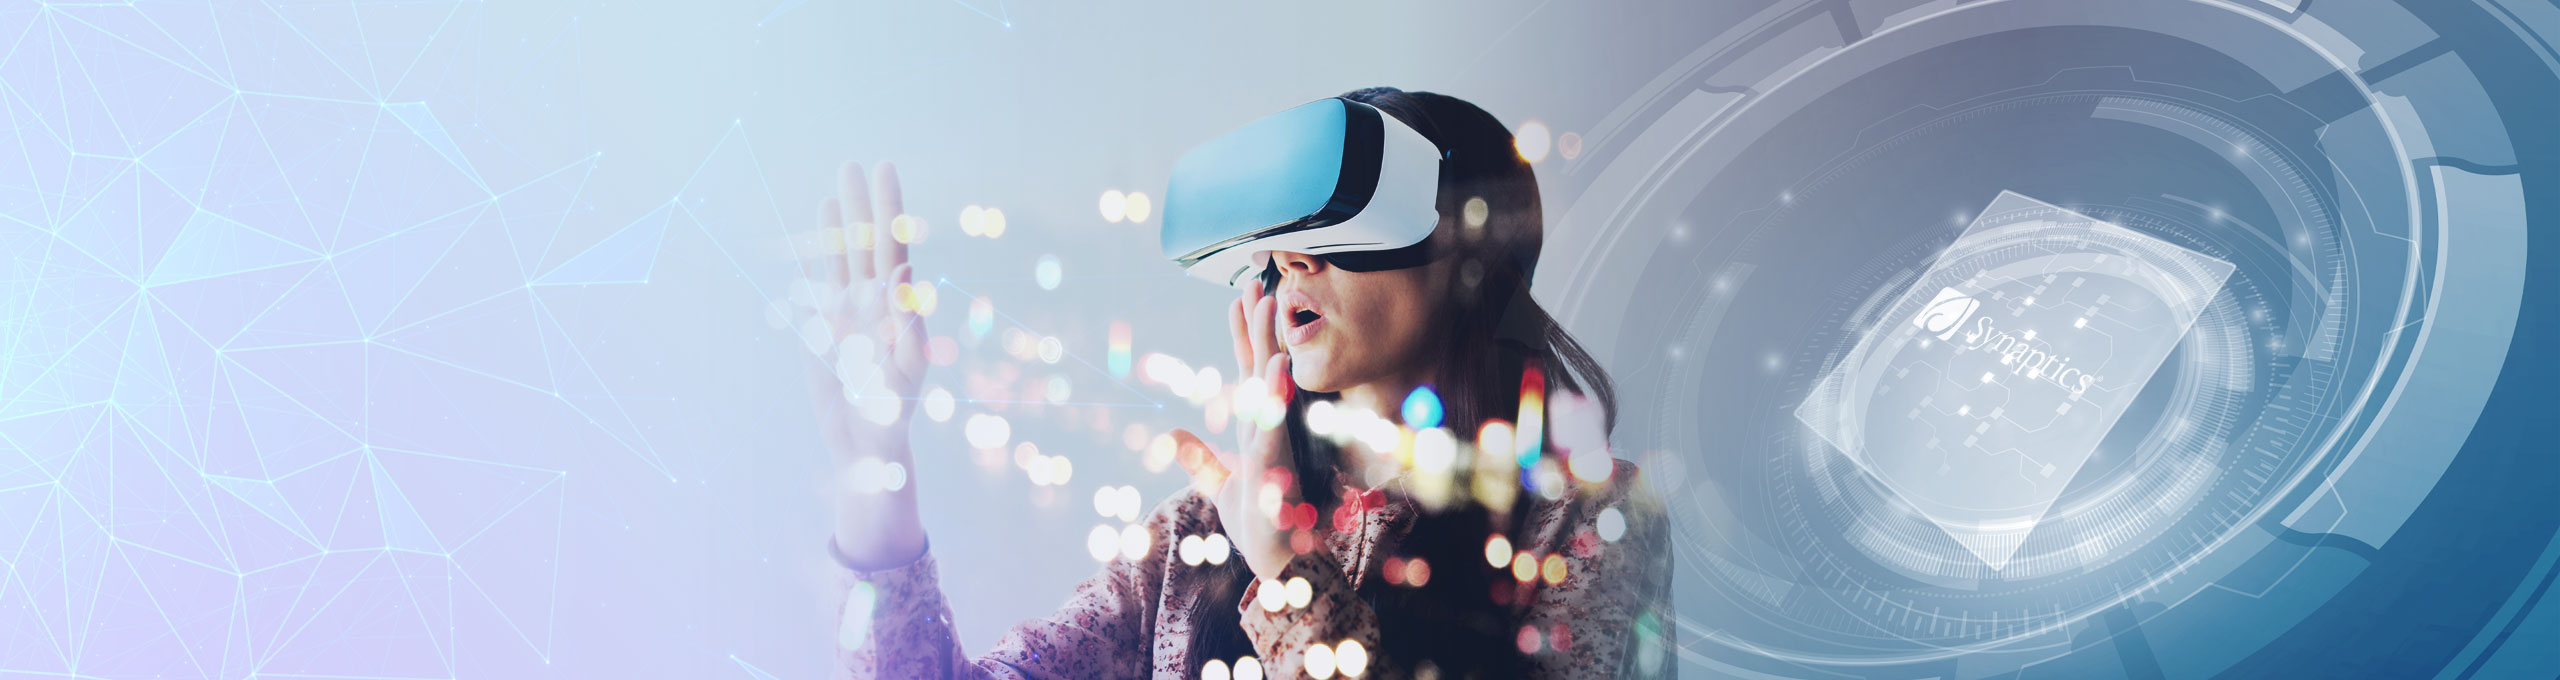 ENABLING THE REAL IN VIRTUAL REALITY